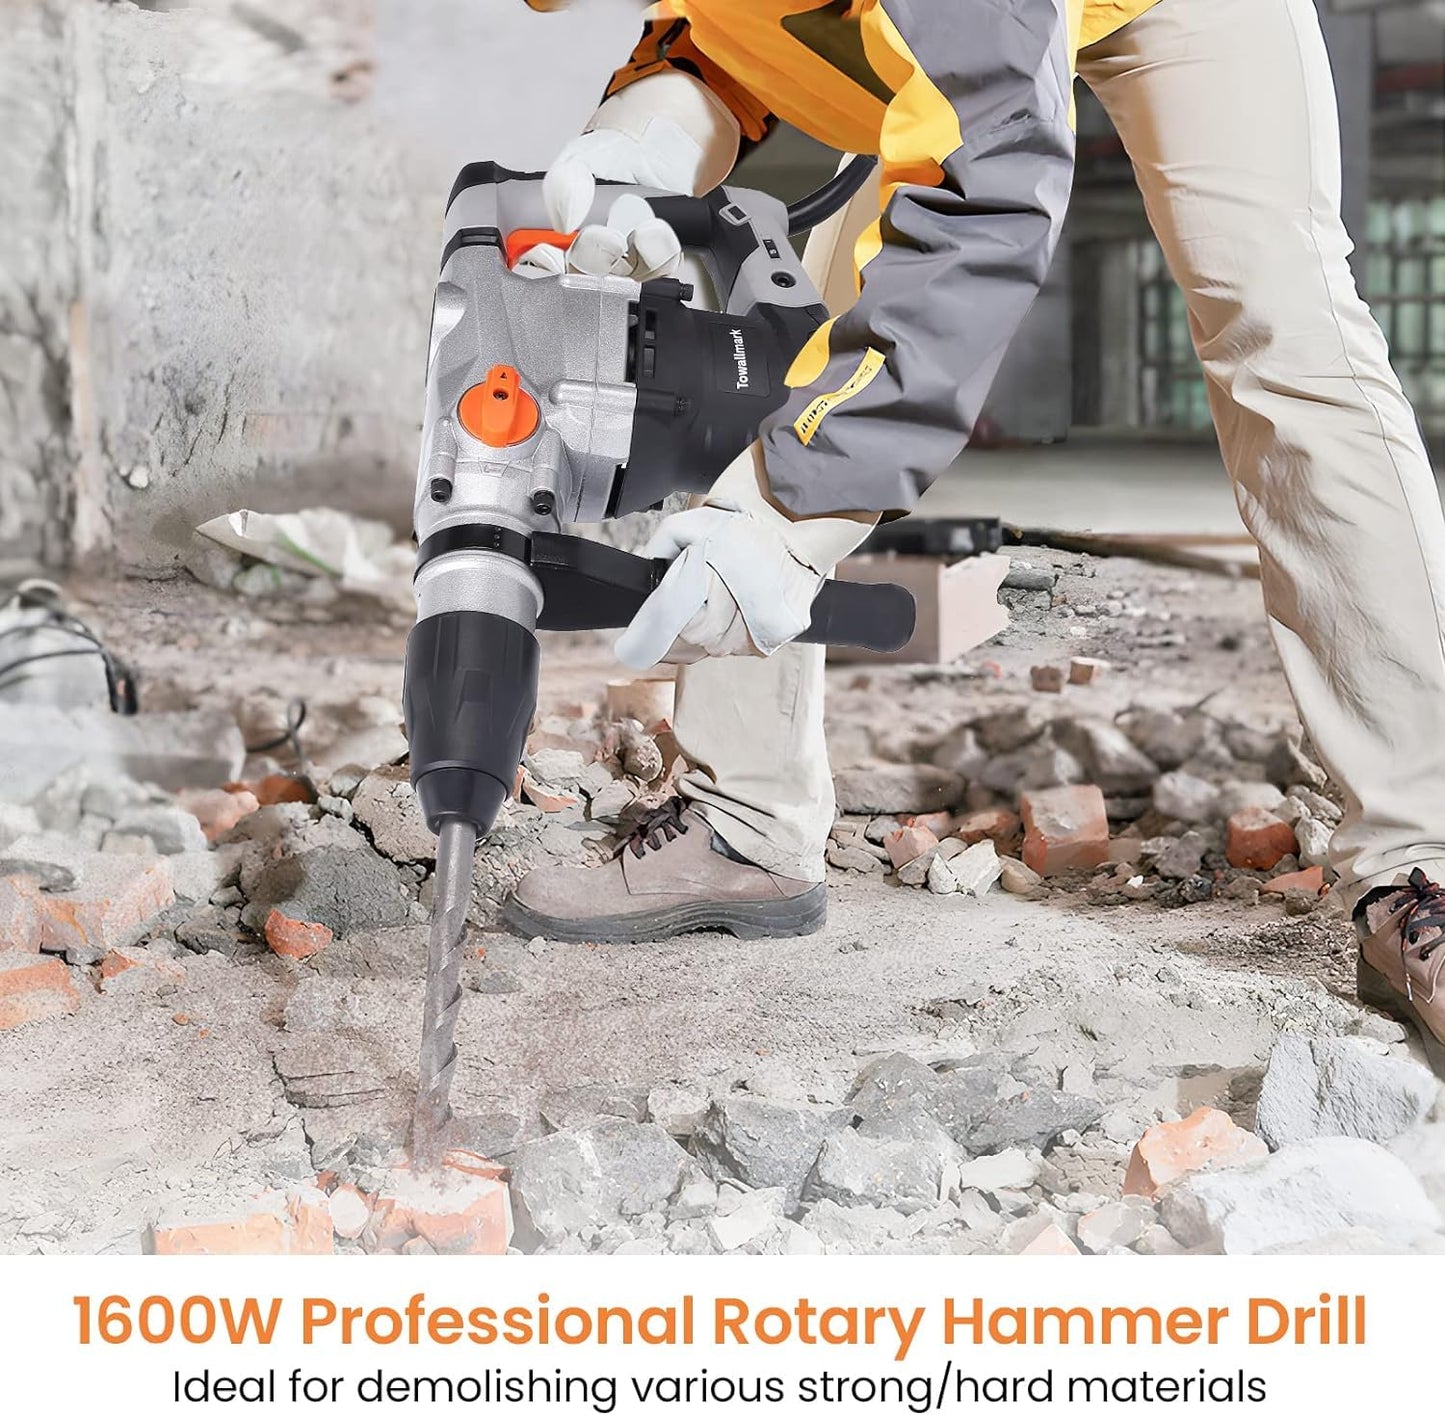 1-9/16" SDS-Hammer Drill with Vibration Control, Max Heavy Duty Rotary hammer drill Bits corded, Safety Clutch,13 Amp 3 Functions Demolition for